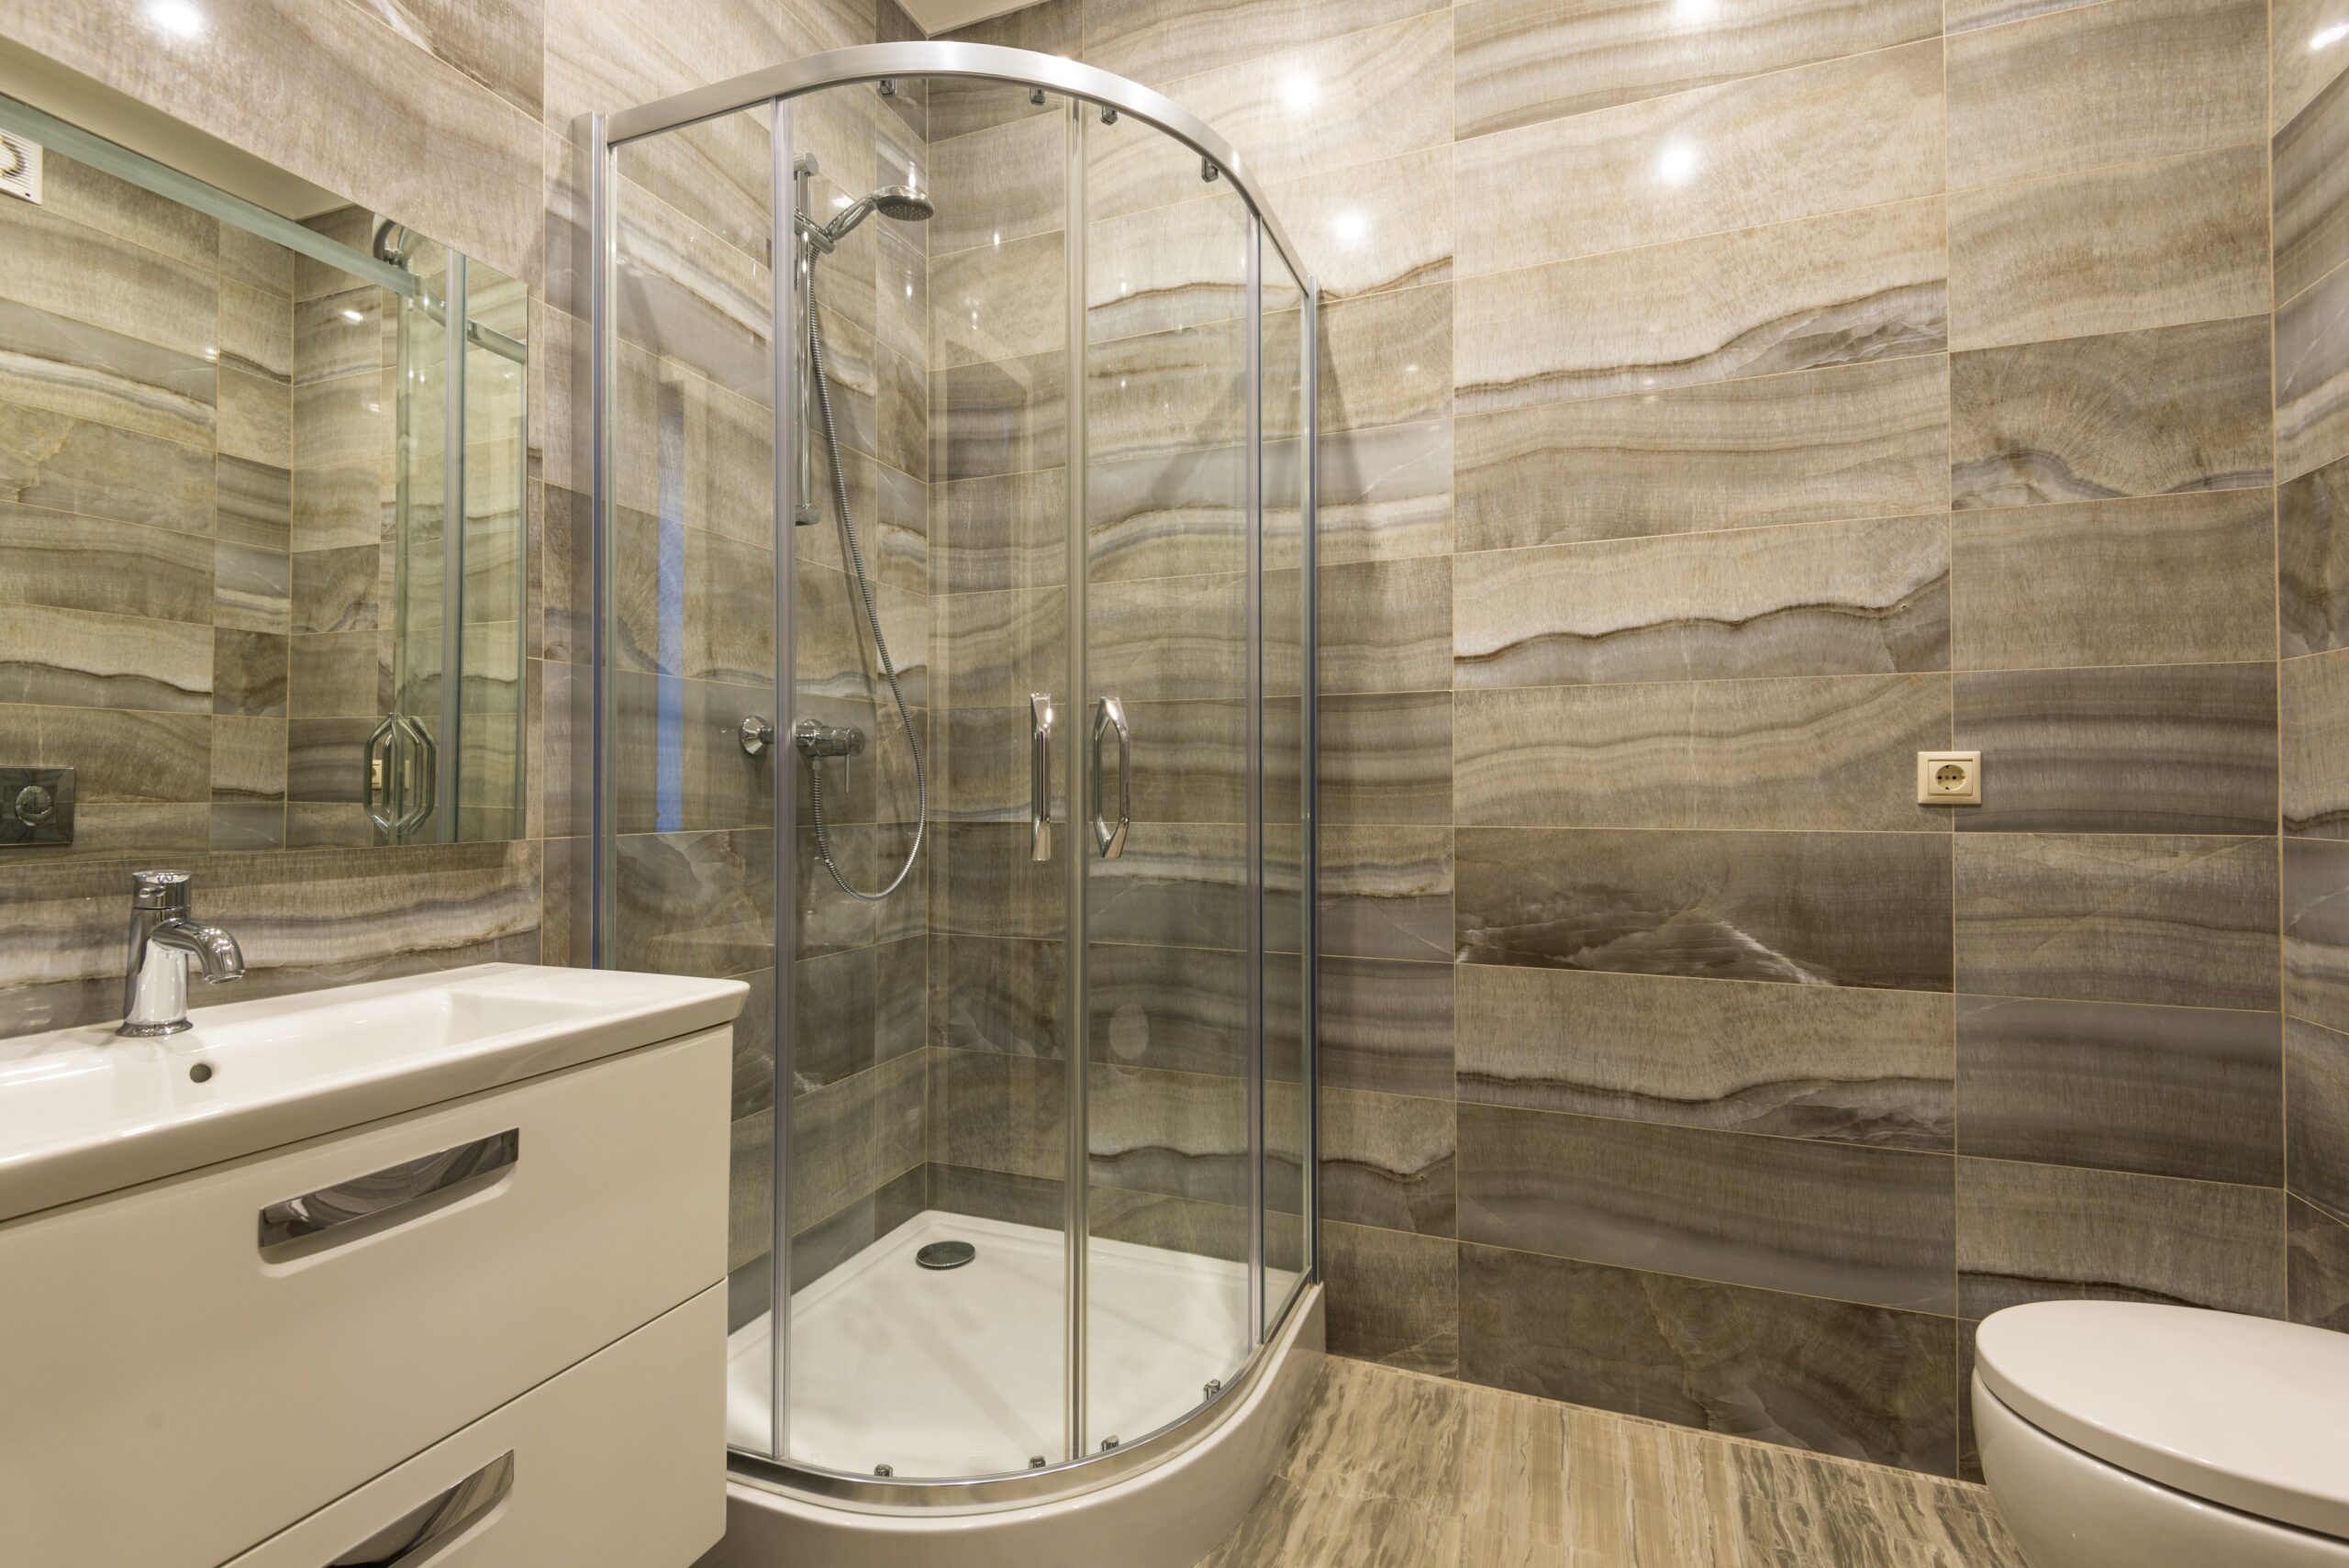 Shower room with a curved glass door